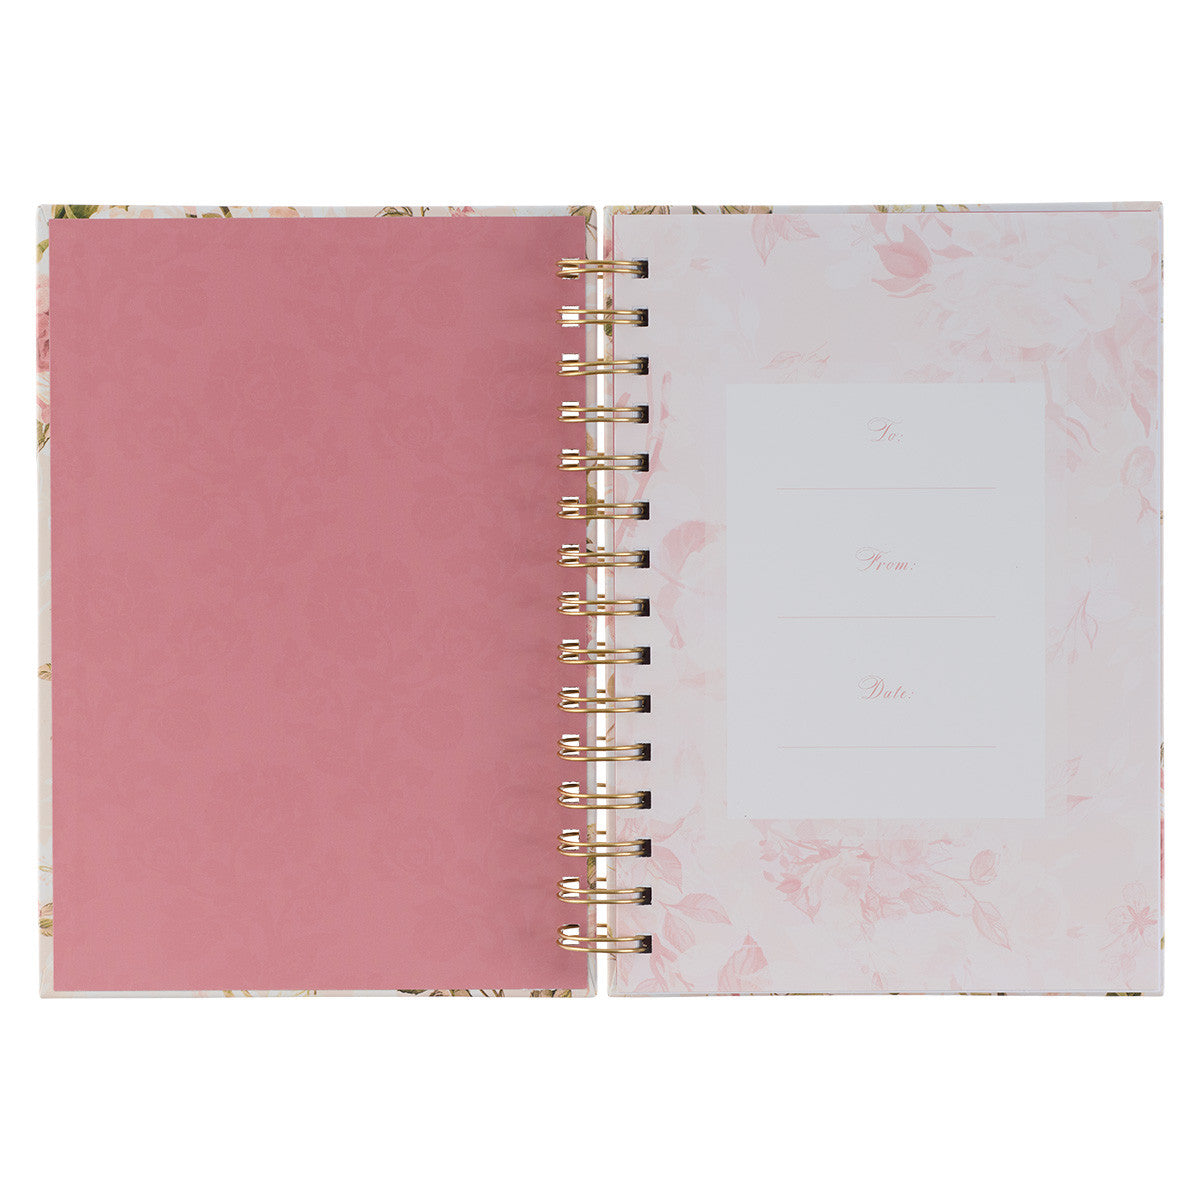 His Grace is Enough Blush Pink Floral Large Wirebound Journal - 2 Corinthians 12:9 - The Christian Gift Company